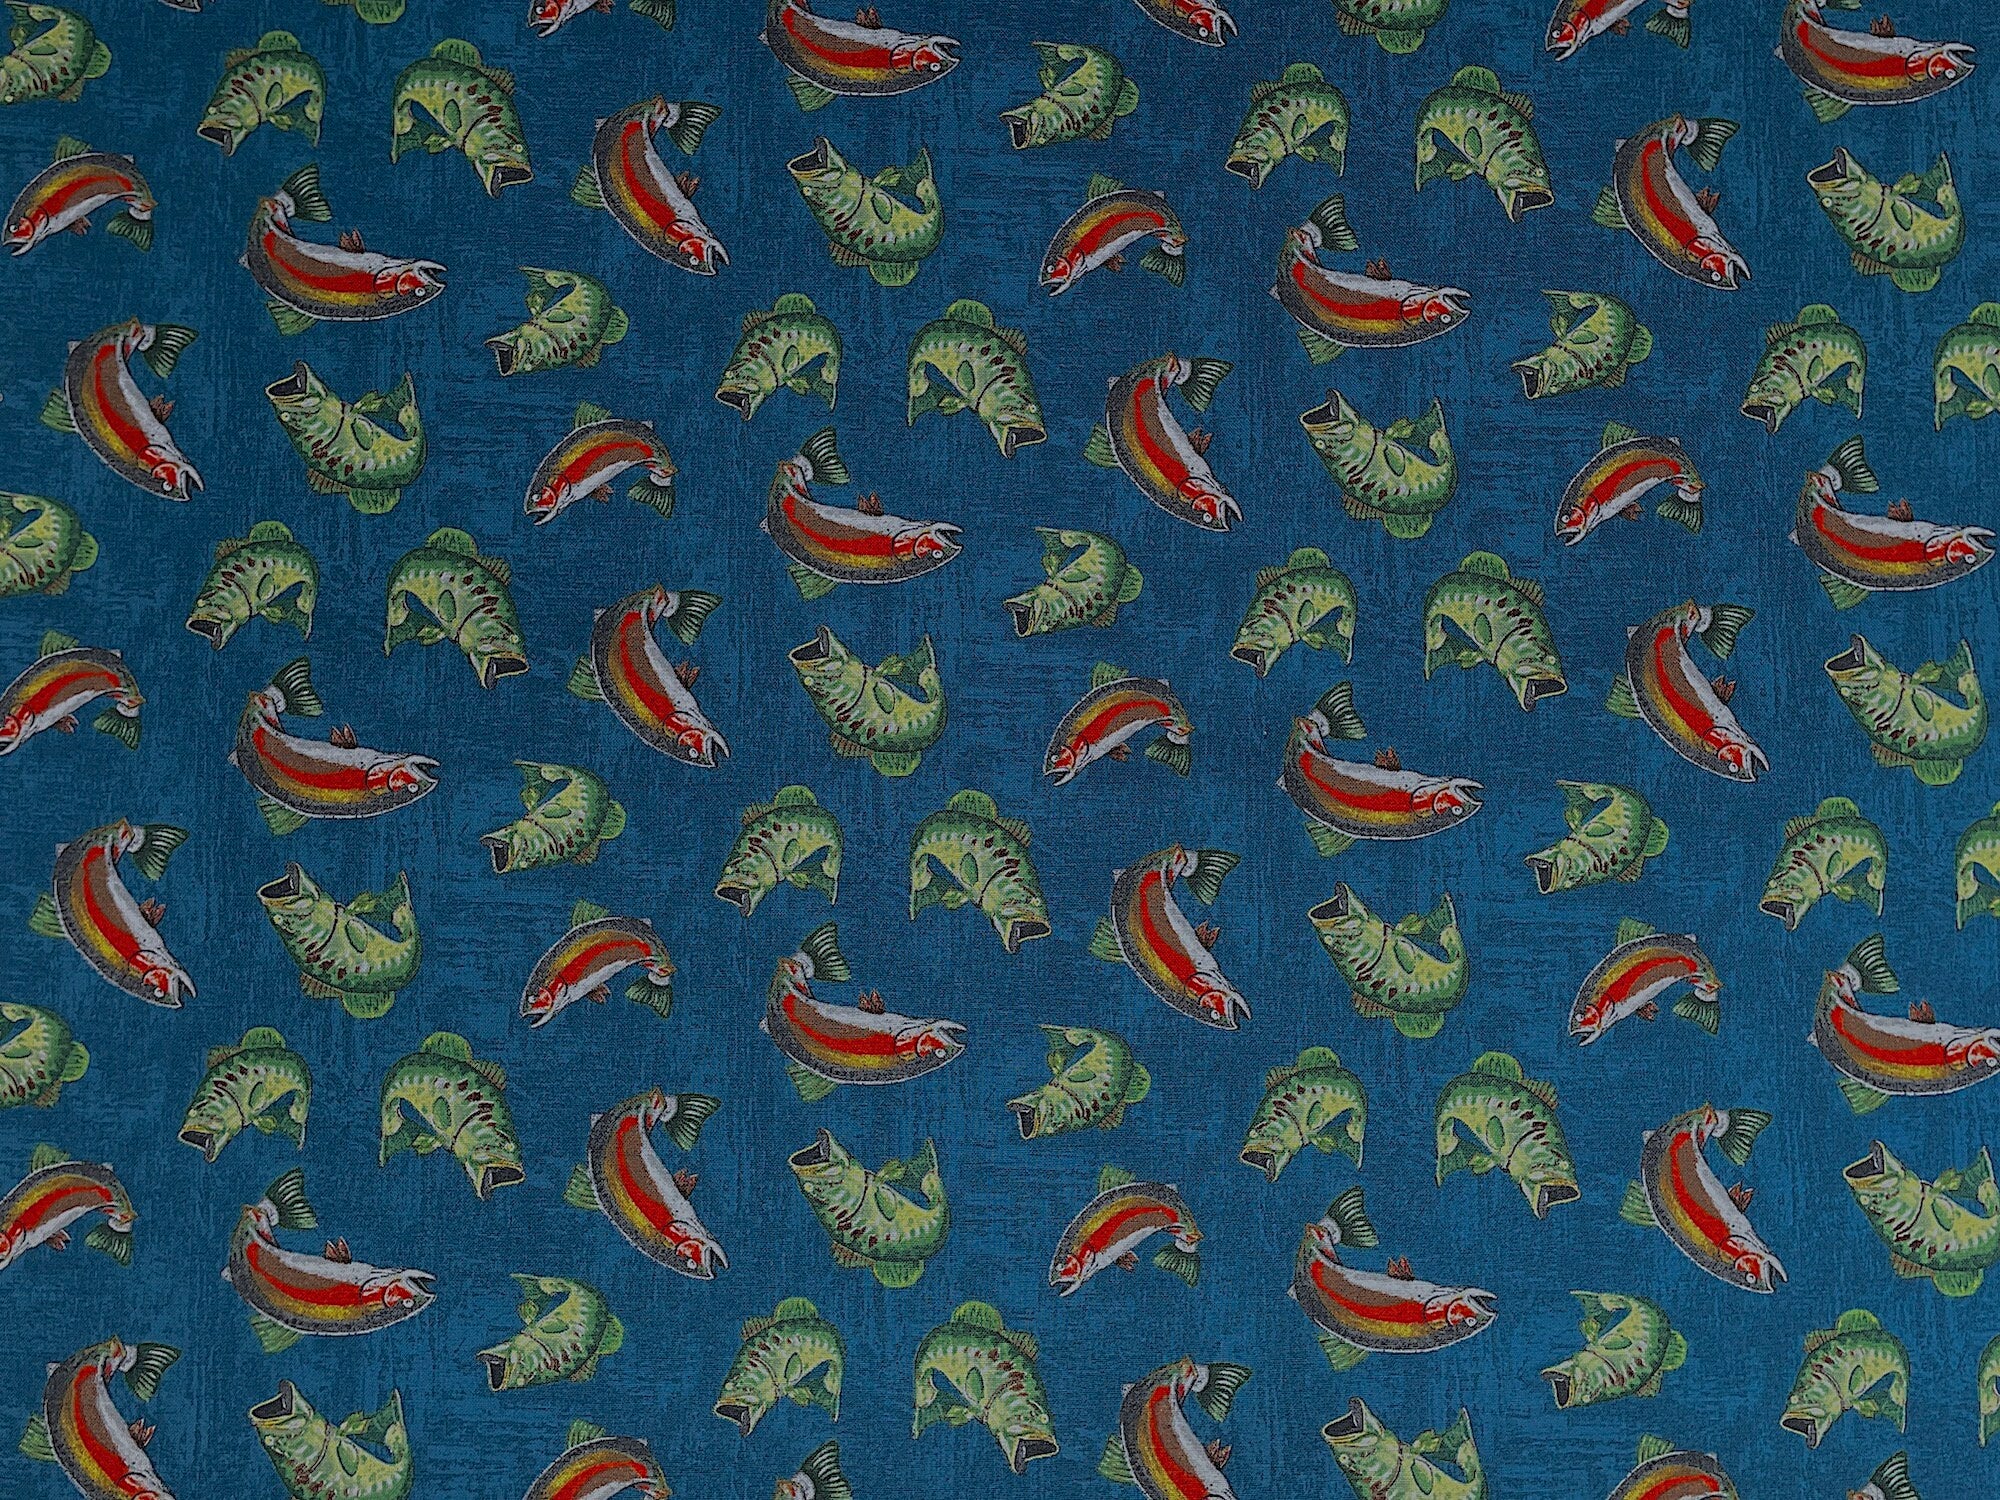 This fabric is covered with fish. Some of the fish are green and others are green, yellow, white and orange. This fabric is part of the Lake Adventure collection by Wilmington Prints.